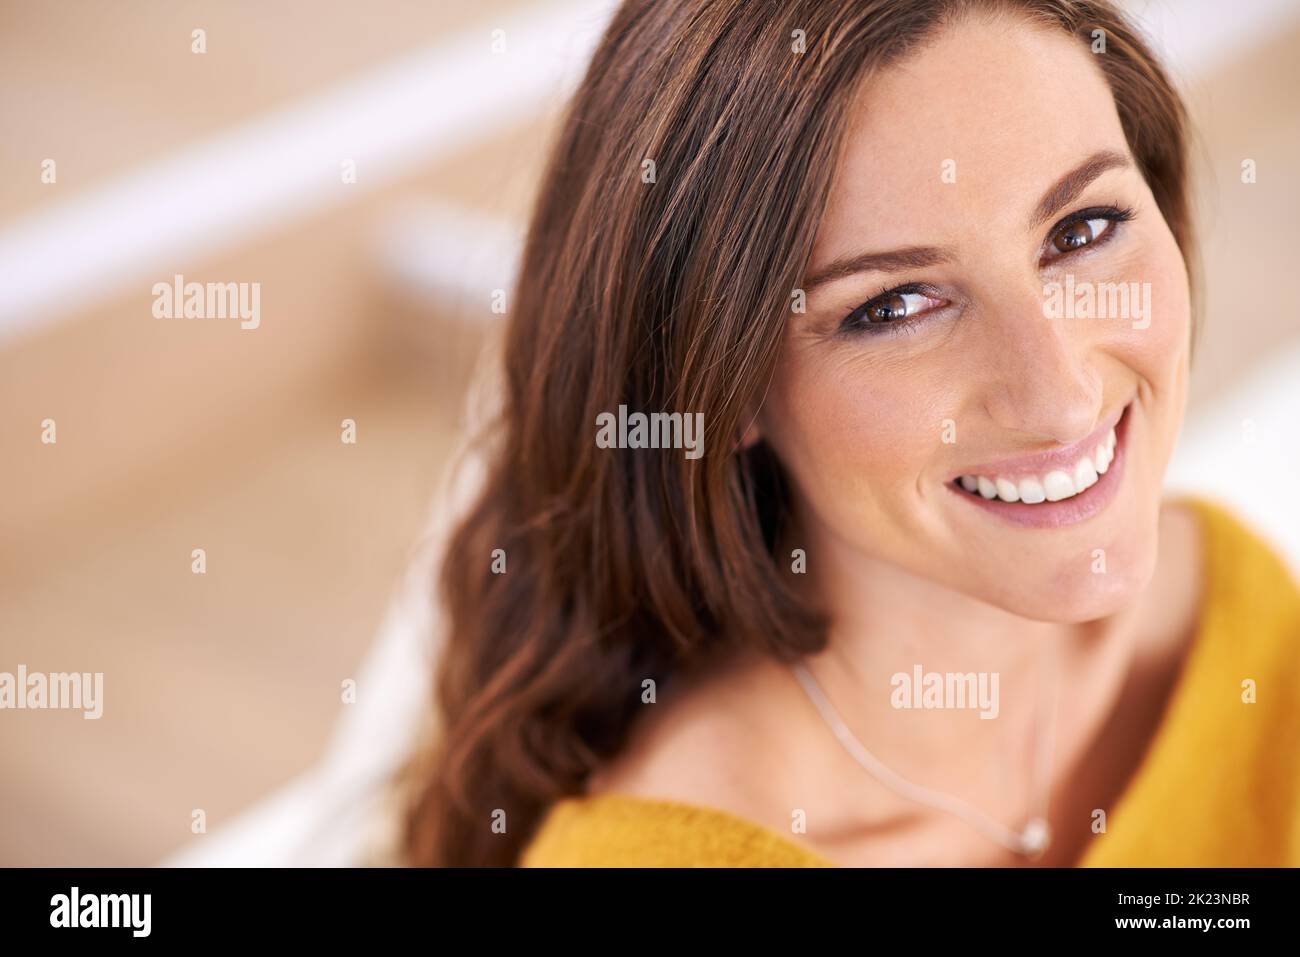 She has a smile like heaven. Closeup shot of a beautiful young woman sitting indoors. Stock Photo